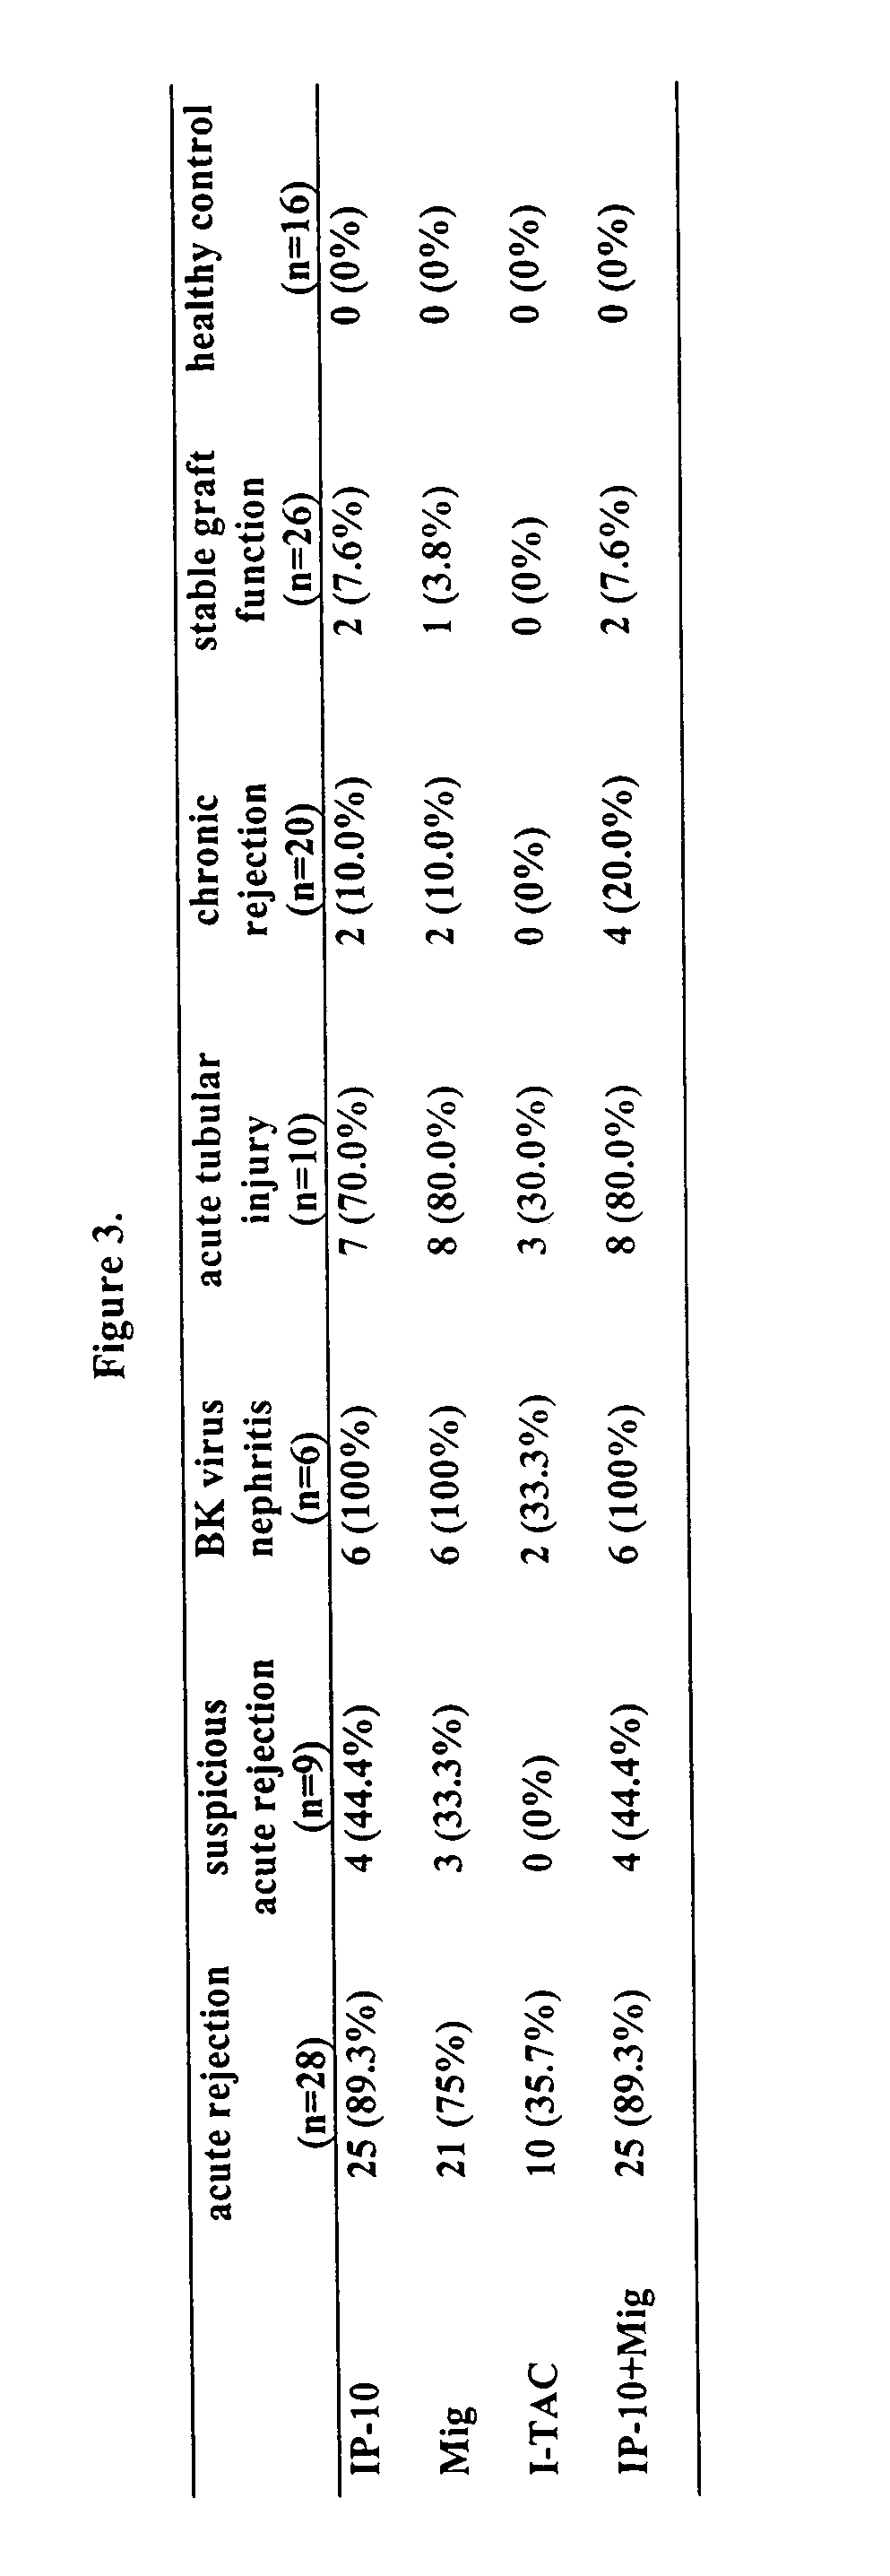 Systems and methods for characterizing kidney diseases